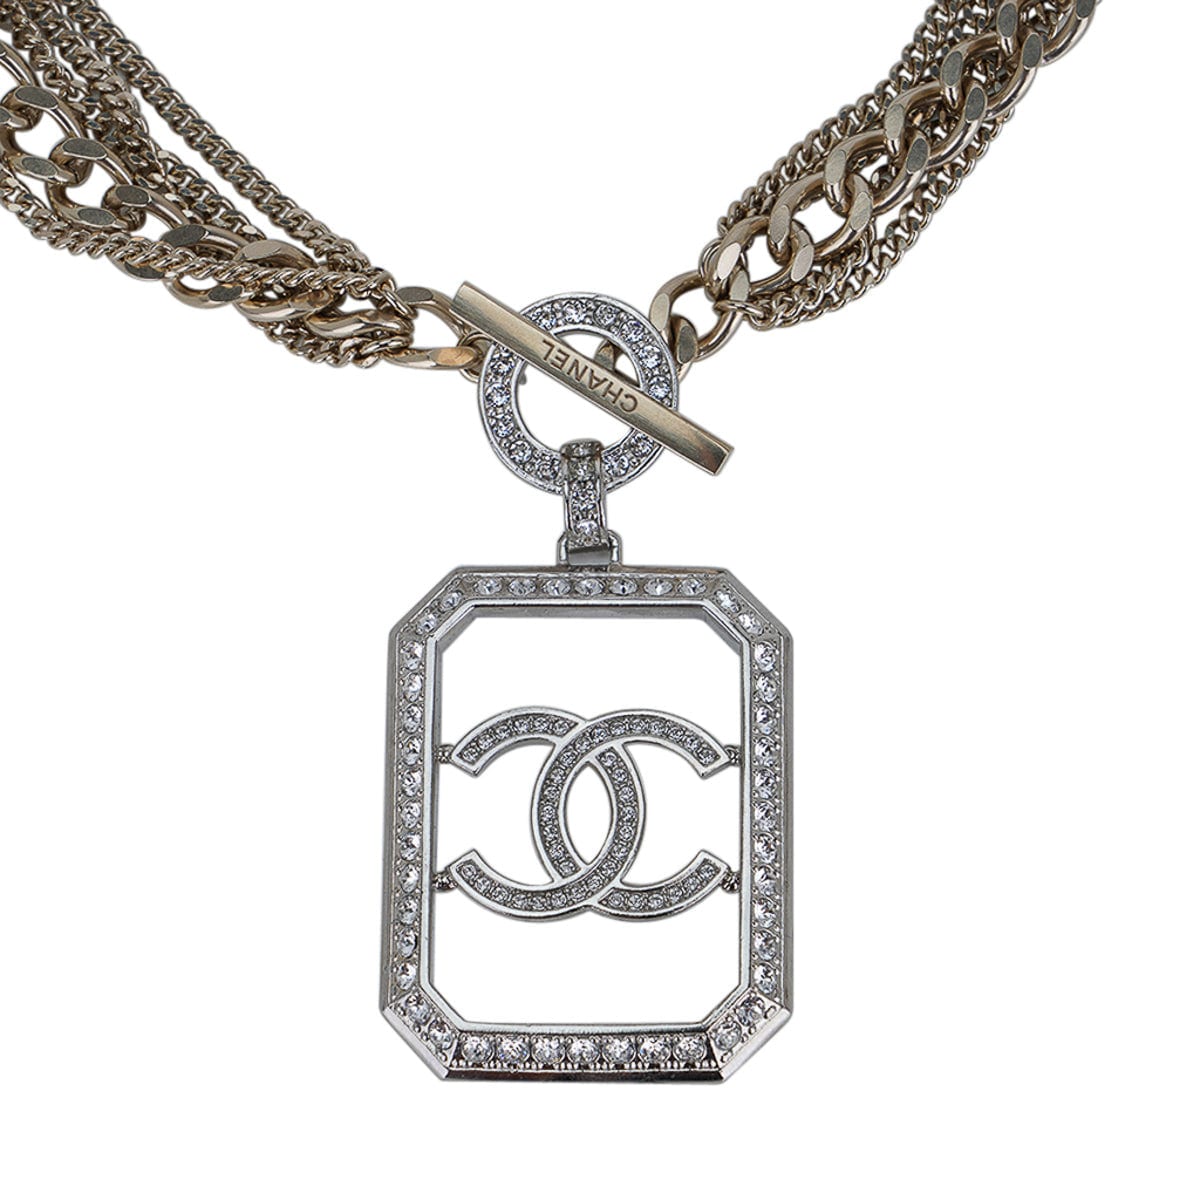 CHANEL+Runway+2019+Pearl+Strand+Necklace+Gold+Crystal+Letters+CHA+